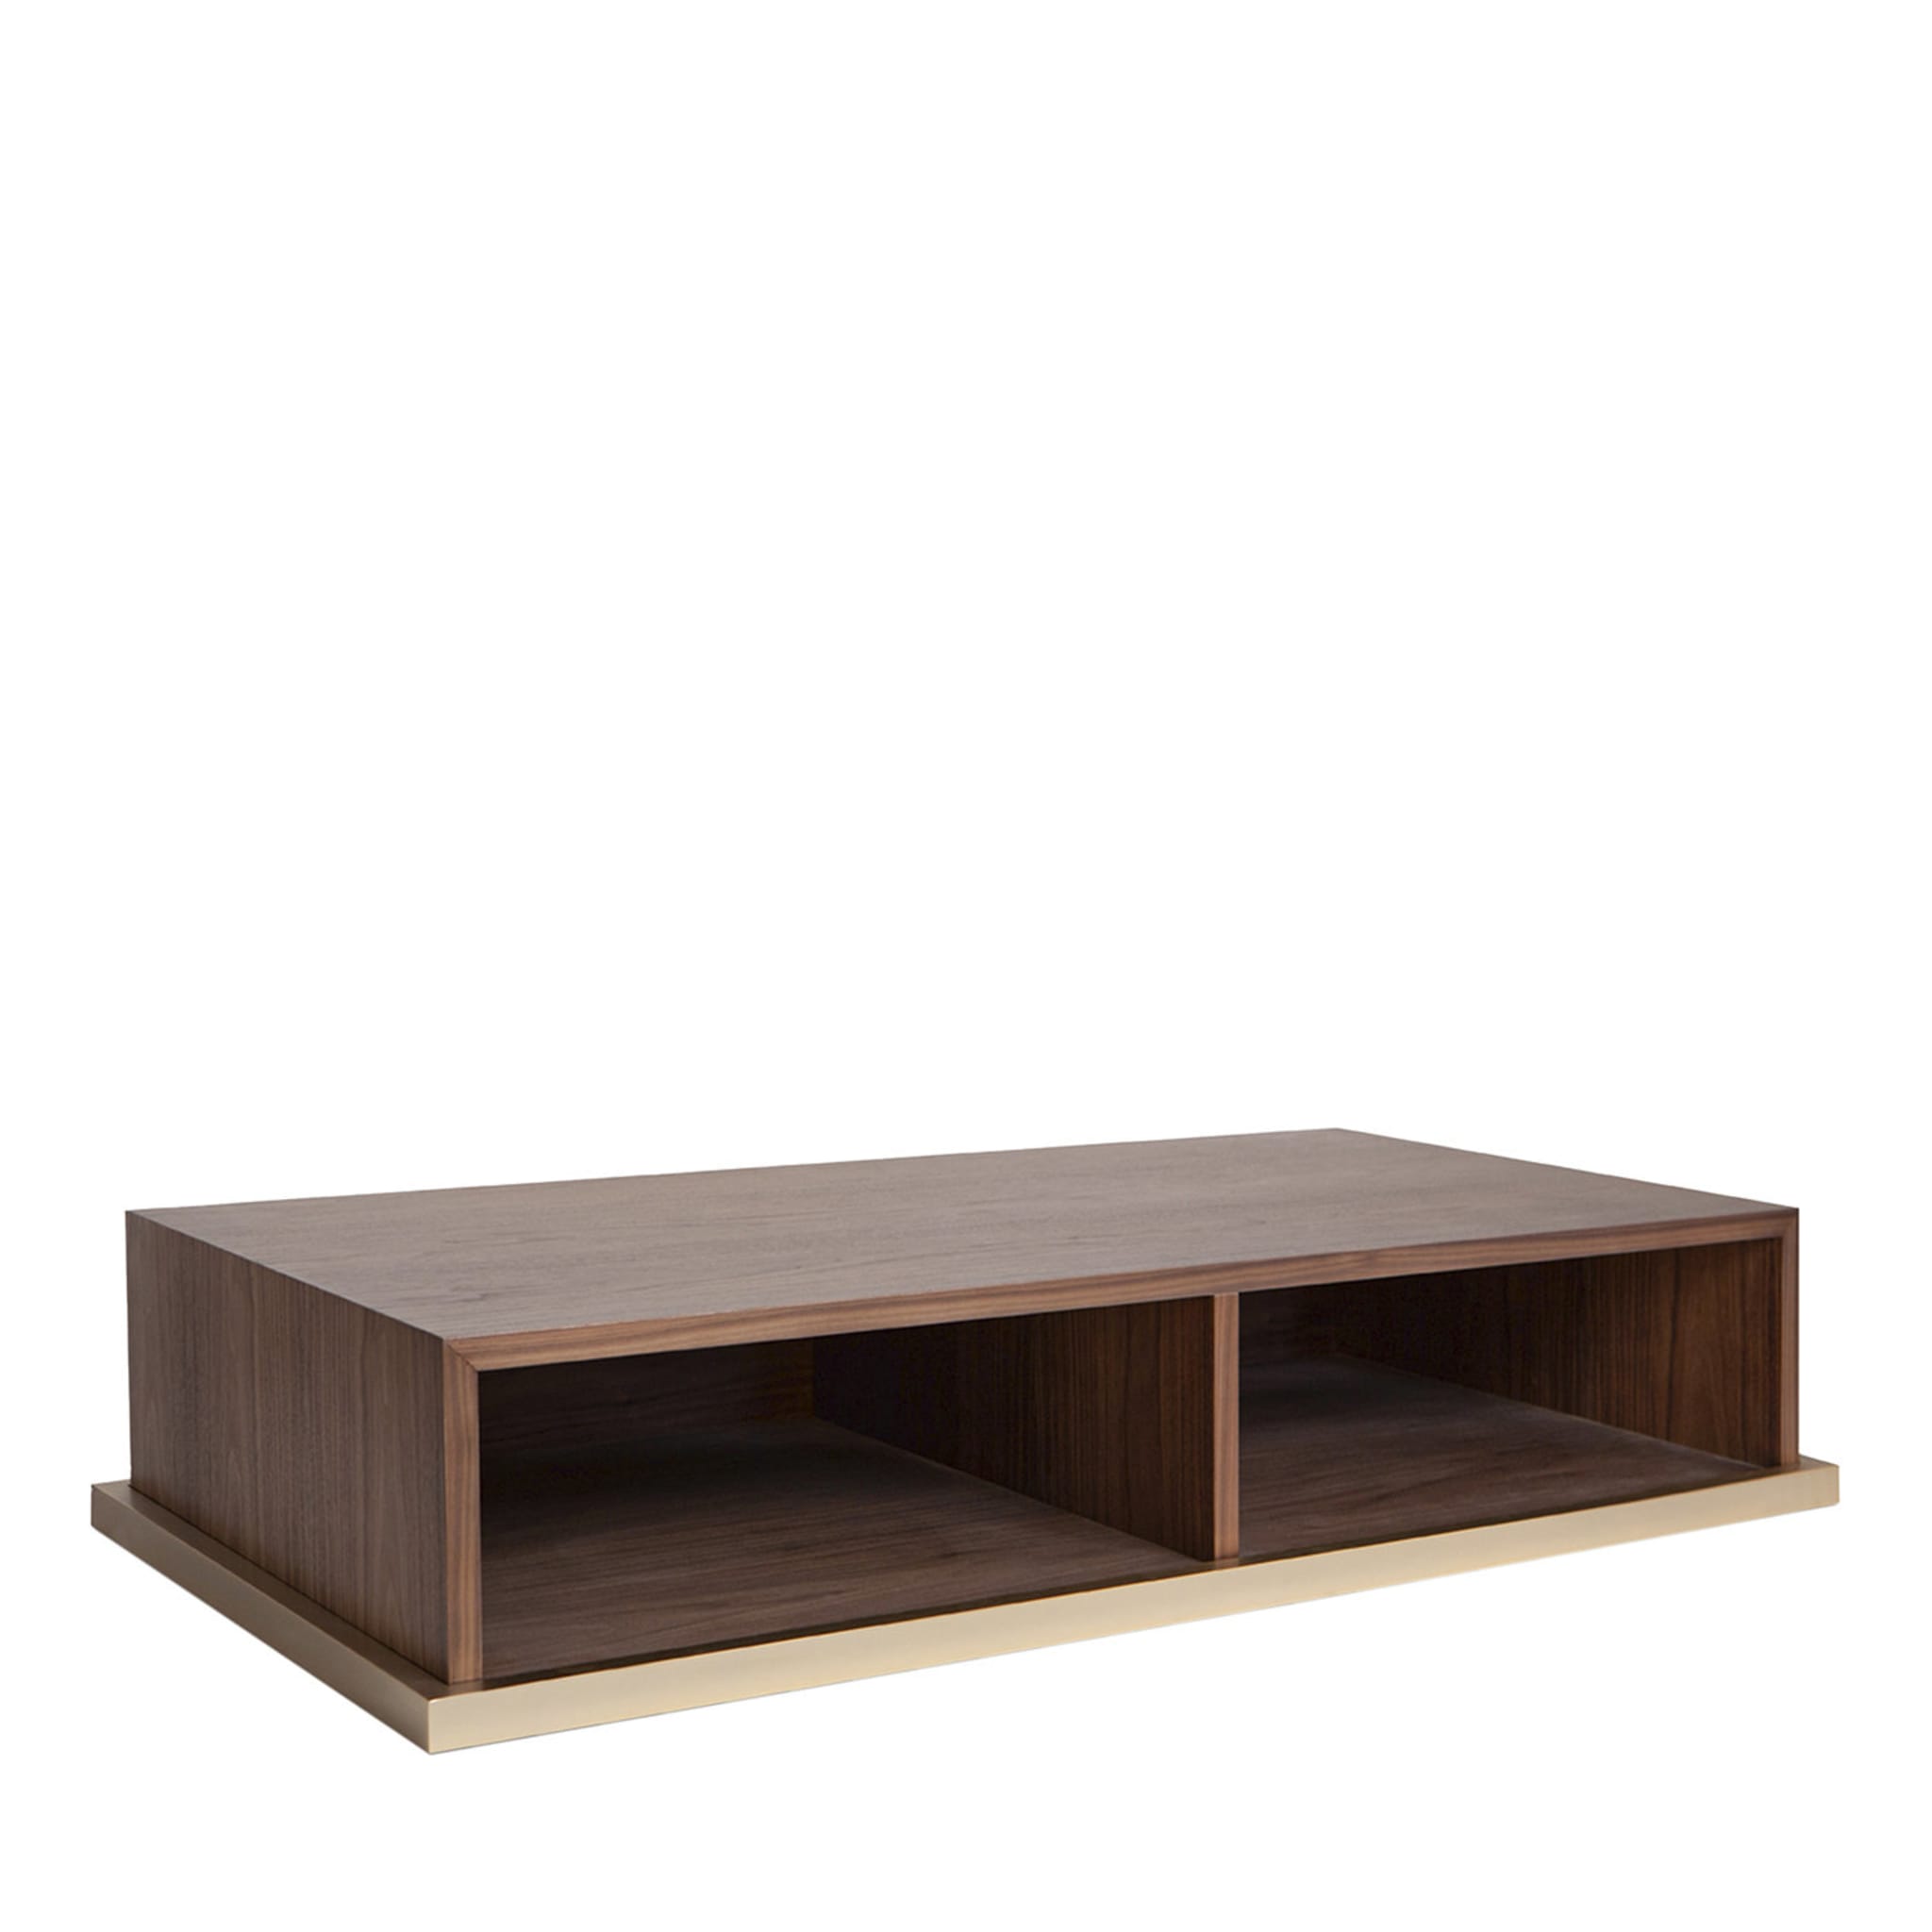 Brick II Canaletto Coffee Table by Archirivolto - Main view